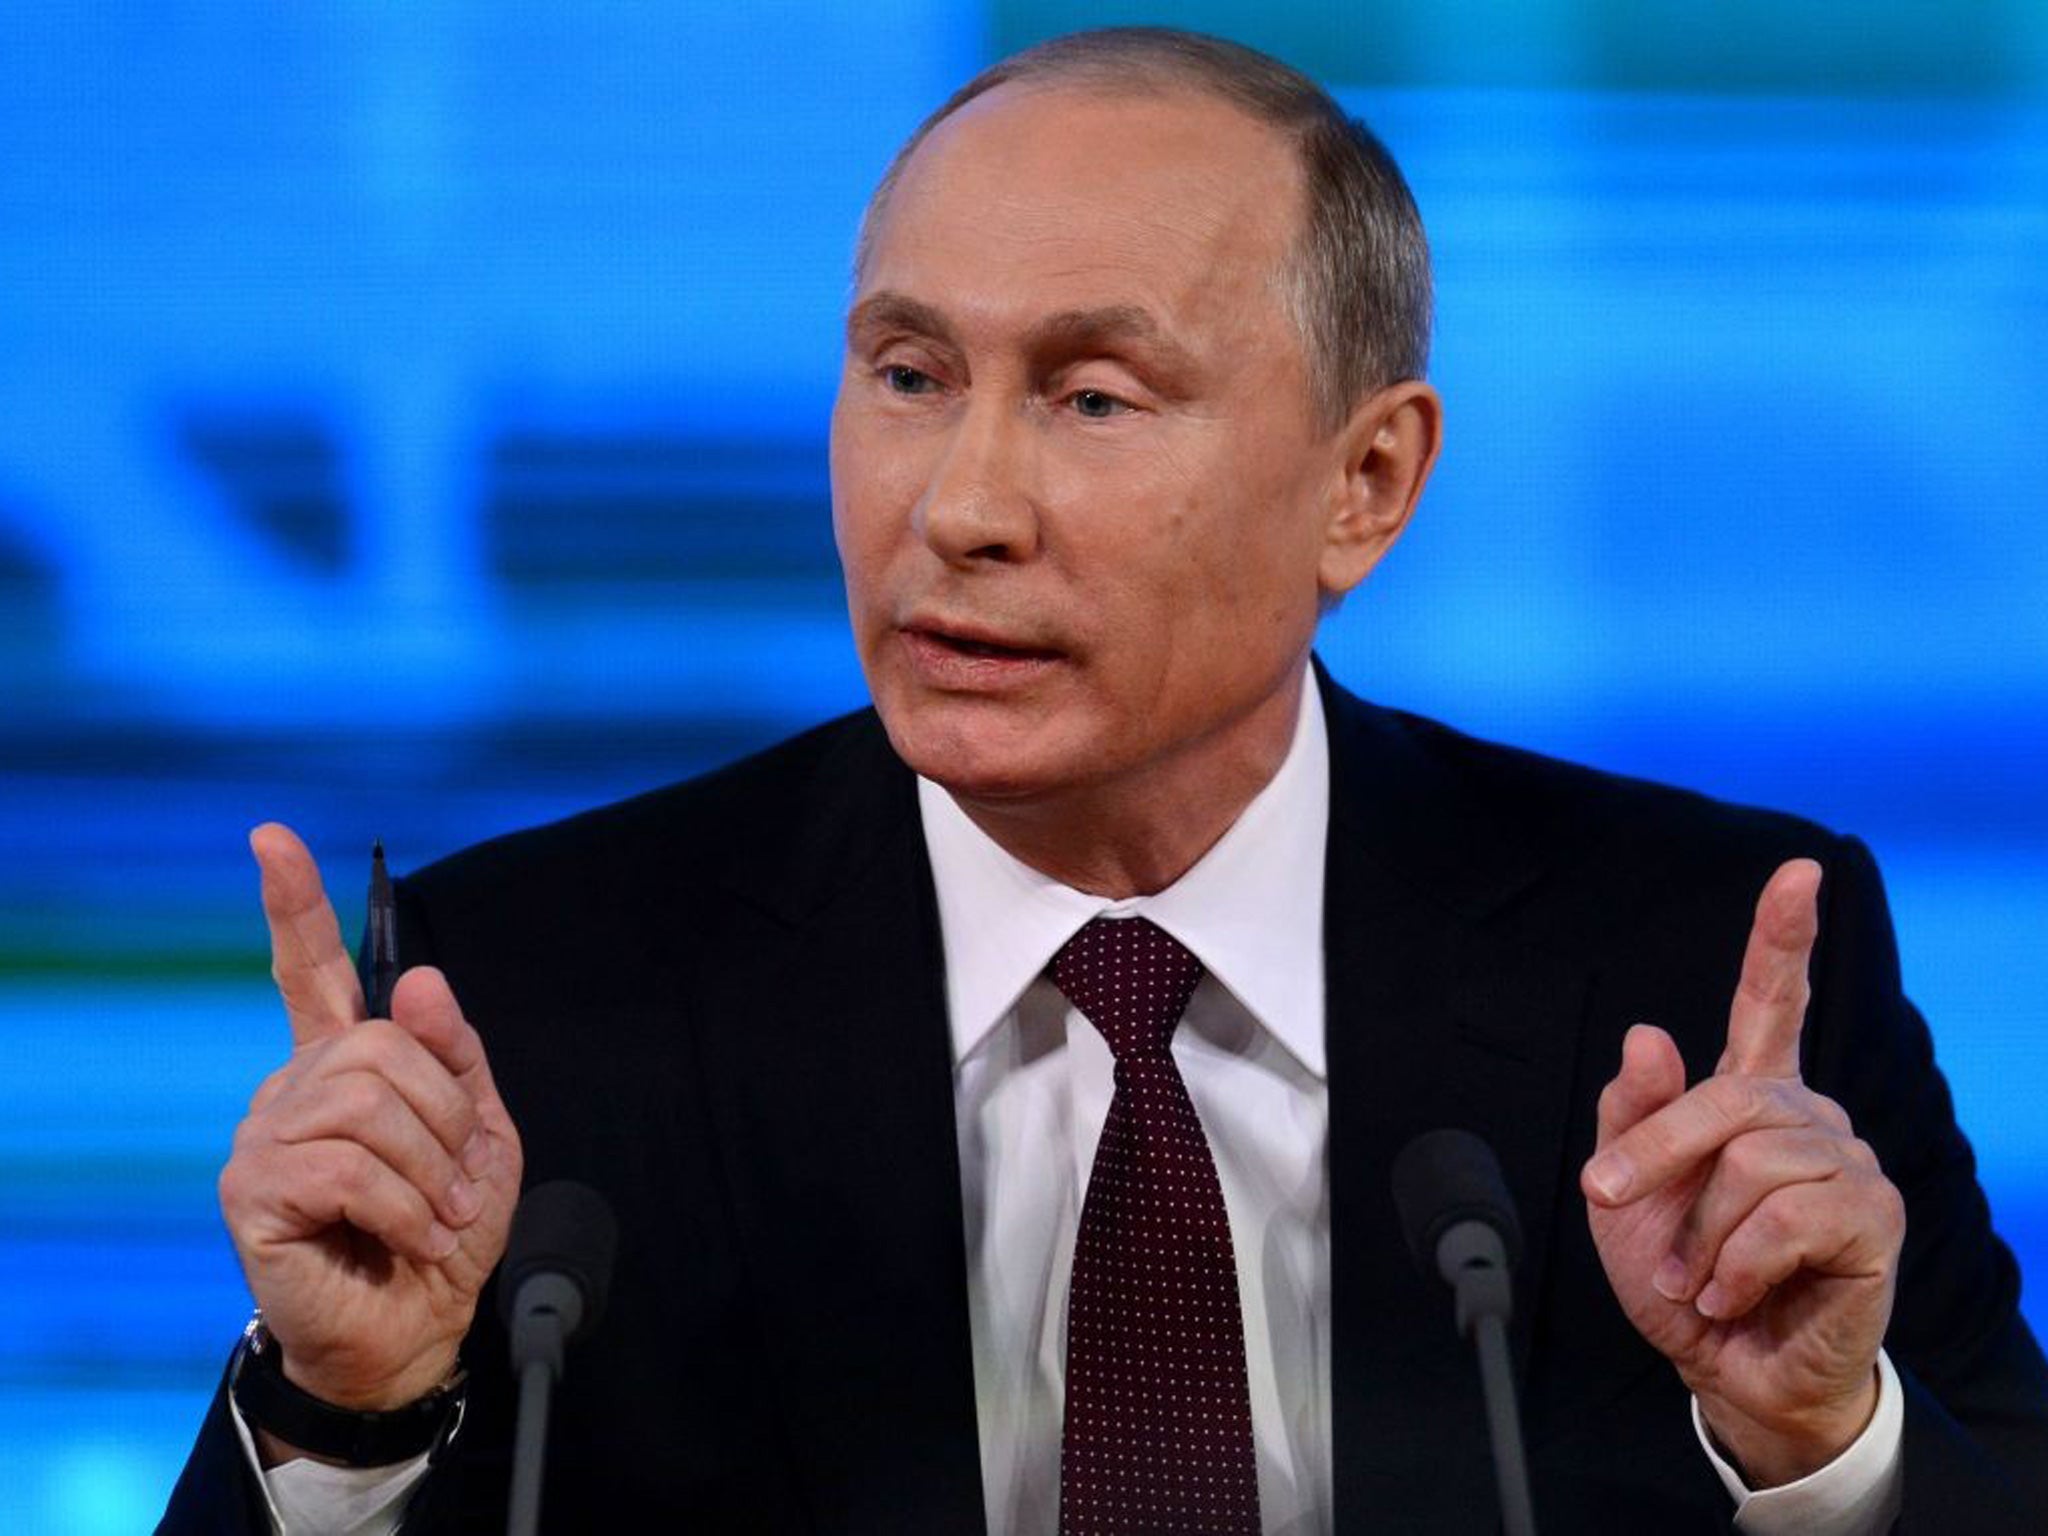 Russia's President Vladimir Putin speaks at his annual press conference in Moscow on 19 December 2013